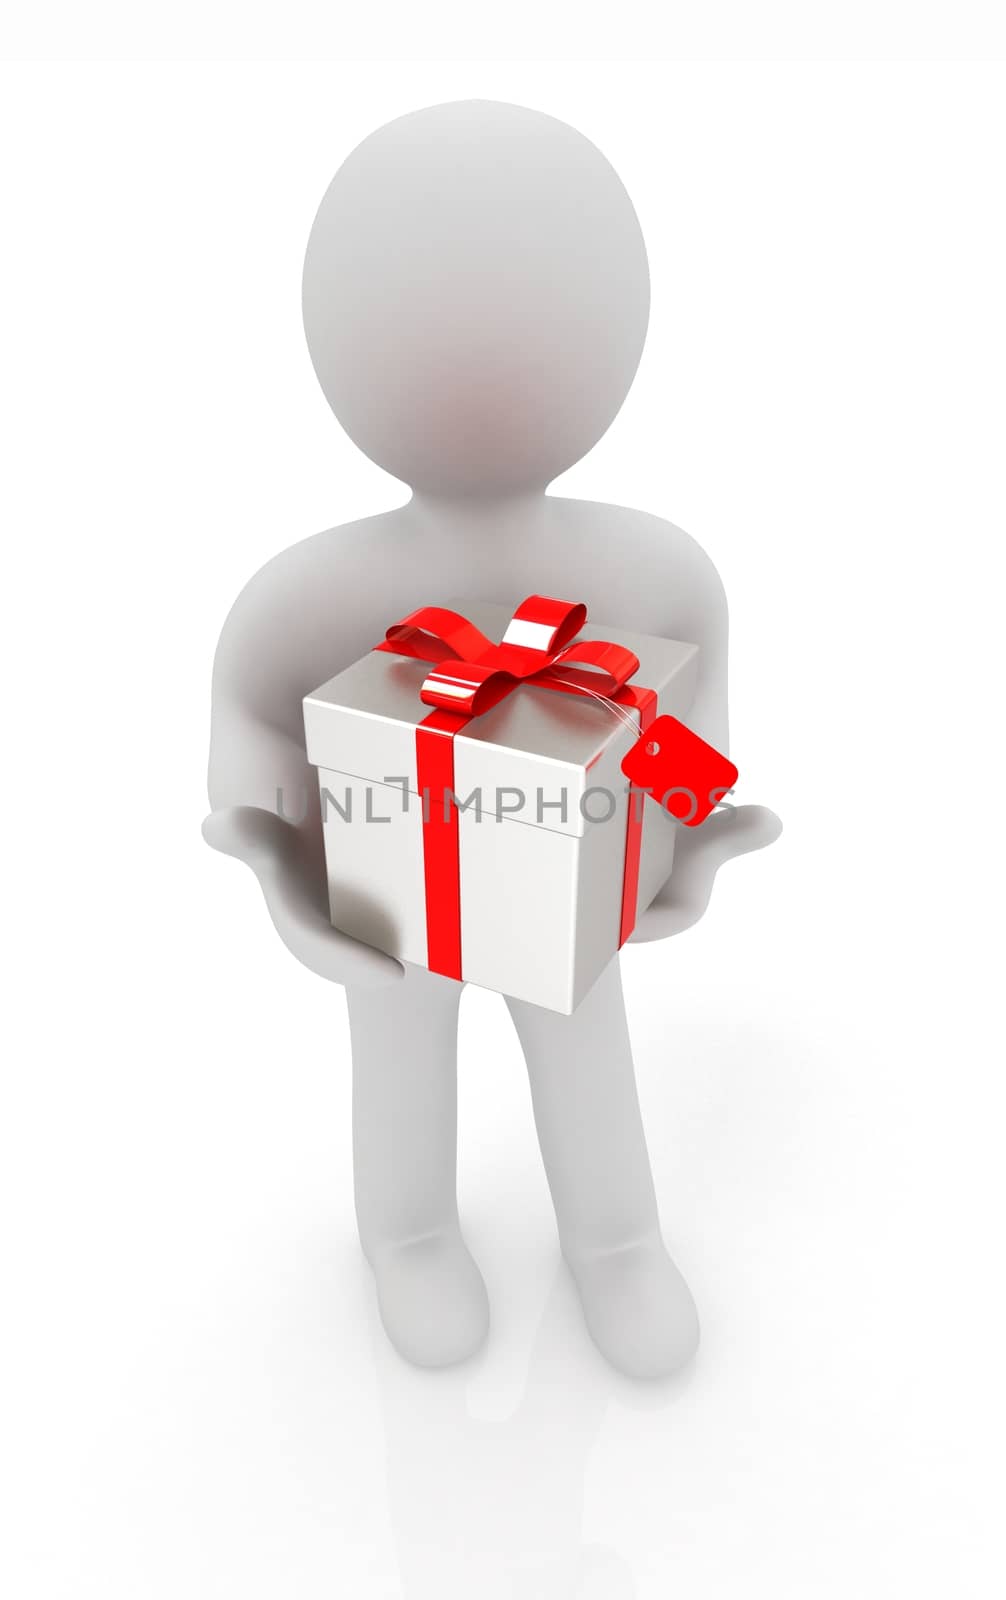 3d man and gift with red ribbon on a white background 